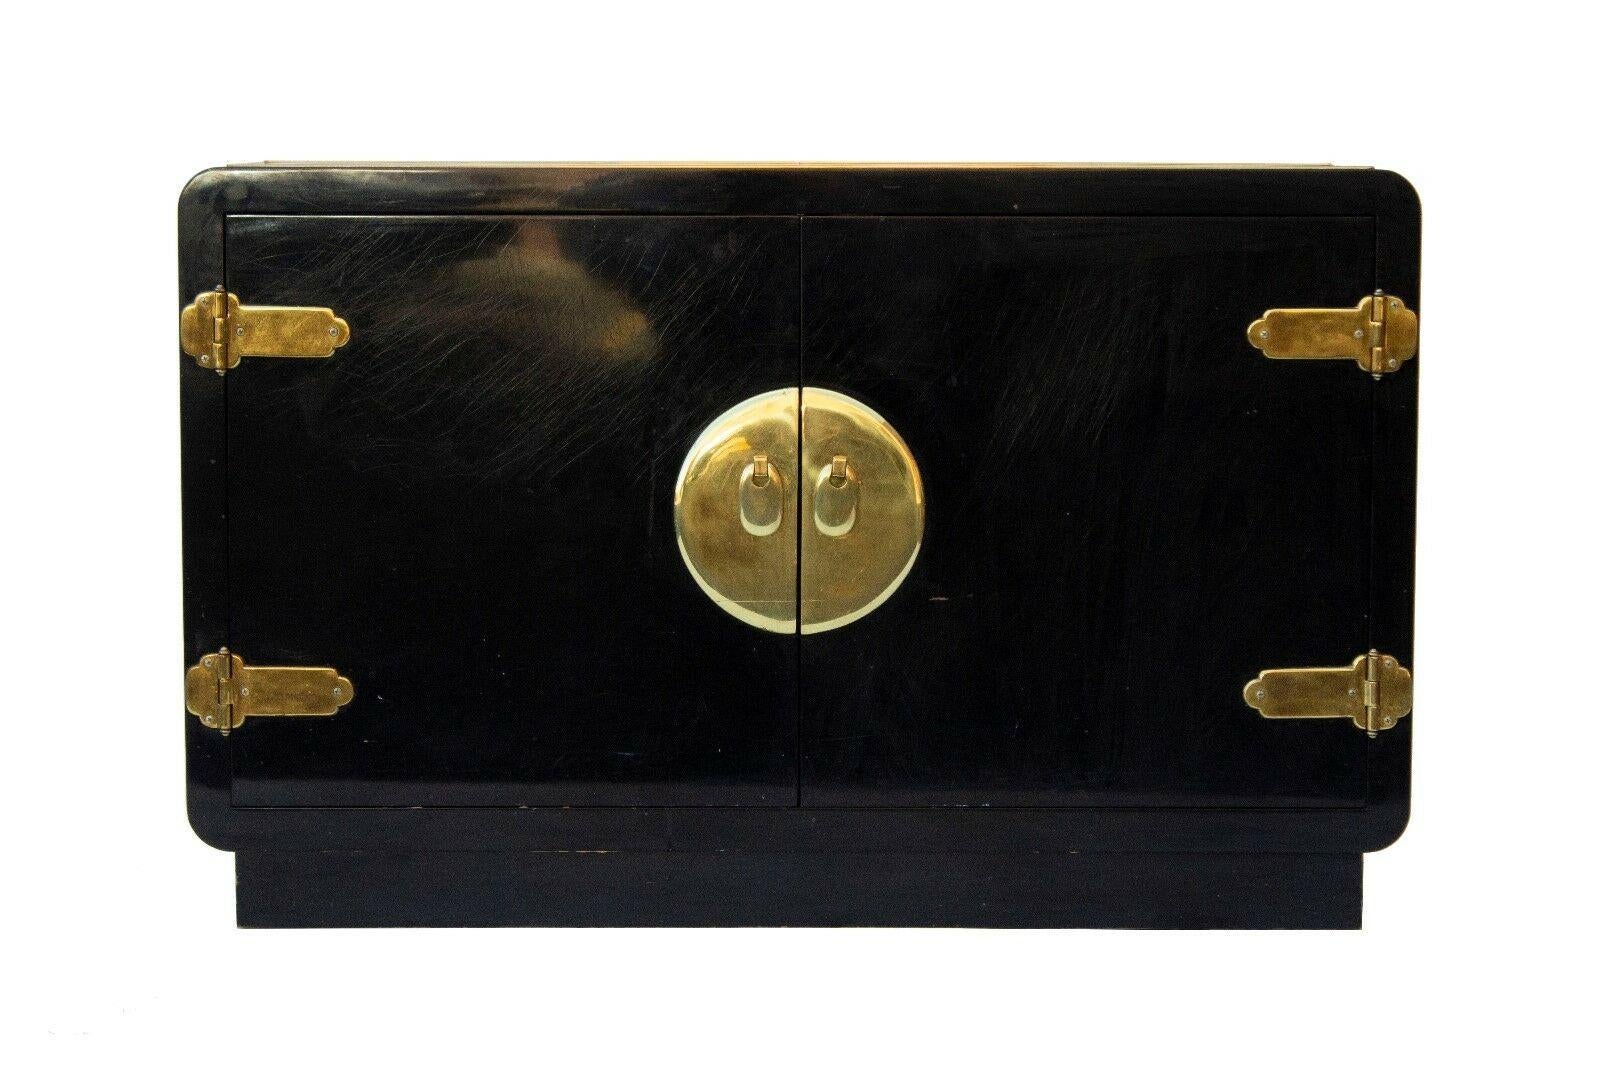 20th century modern Asian inspired black lacquered buffet or cabinet by Mastercraft. Two door designed cabinet with brass trim and details. One interior shelve.